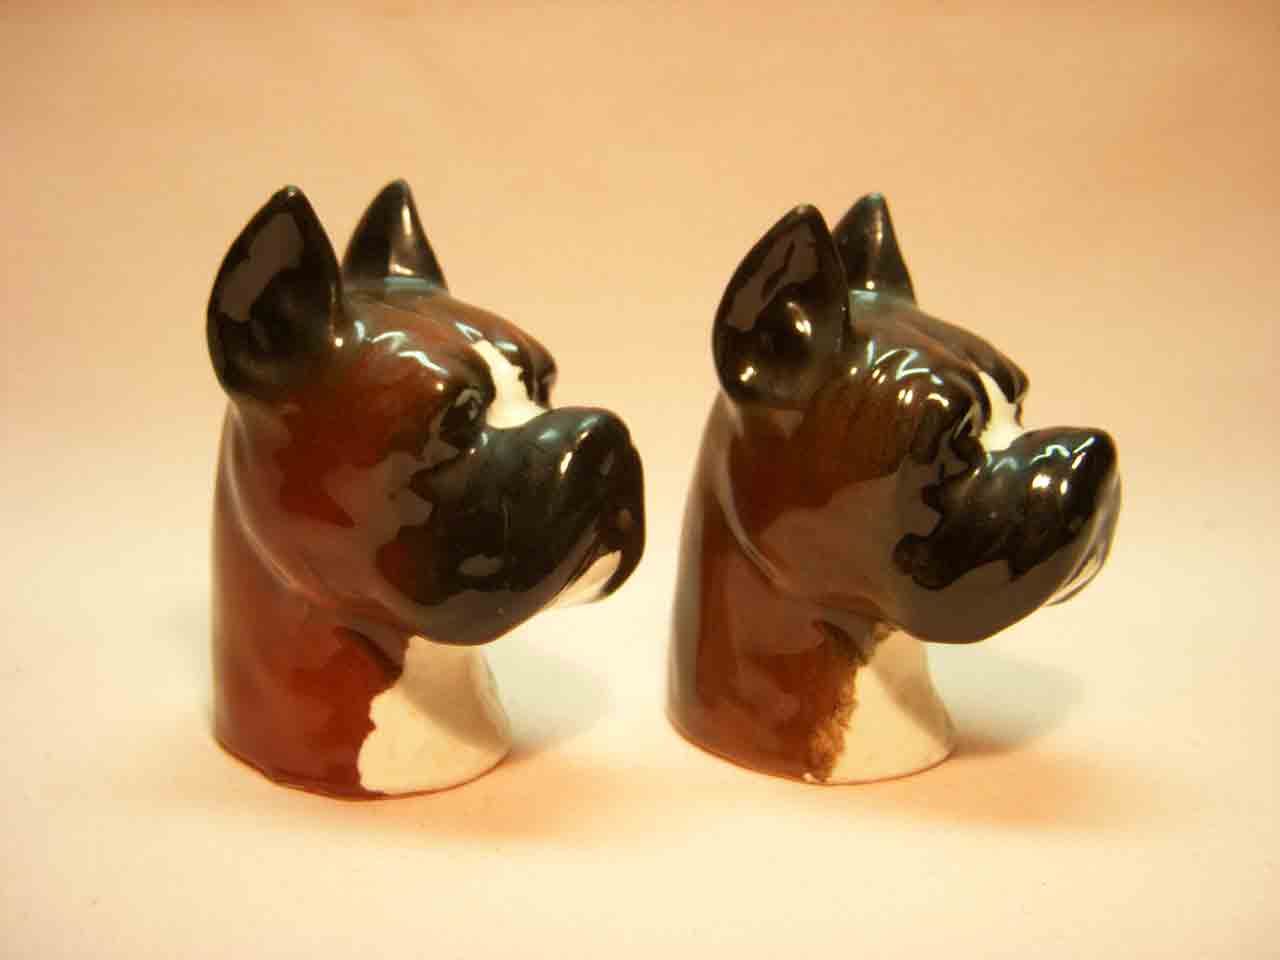 Japan realistic dog heads series of salt and pepper shakers - Boxers